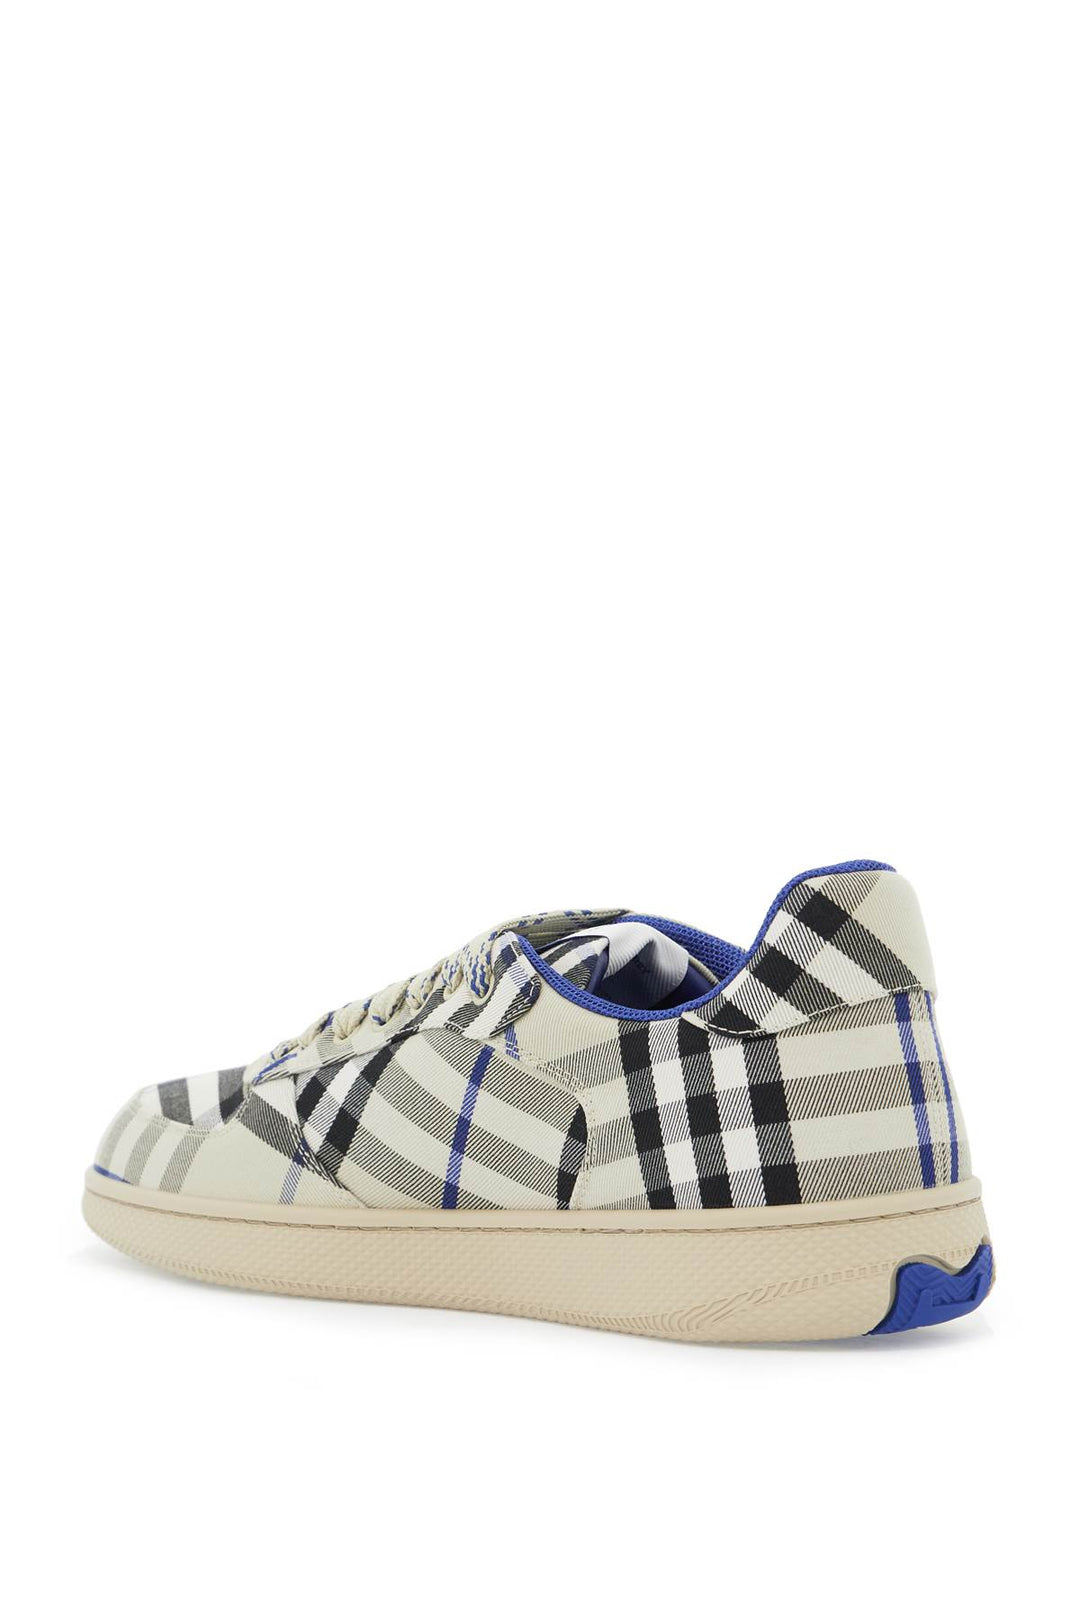 Burberry Terrace Check Sneakers   Grey